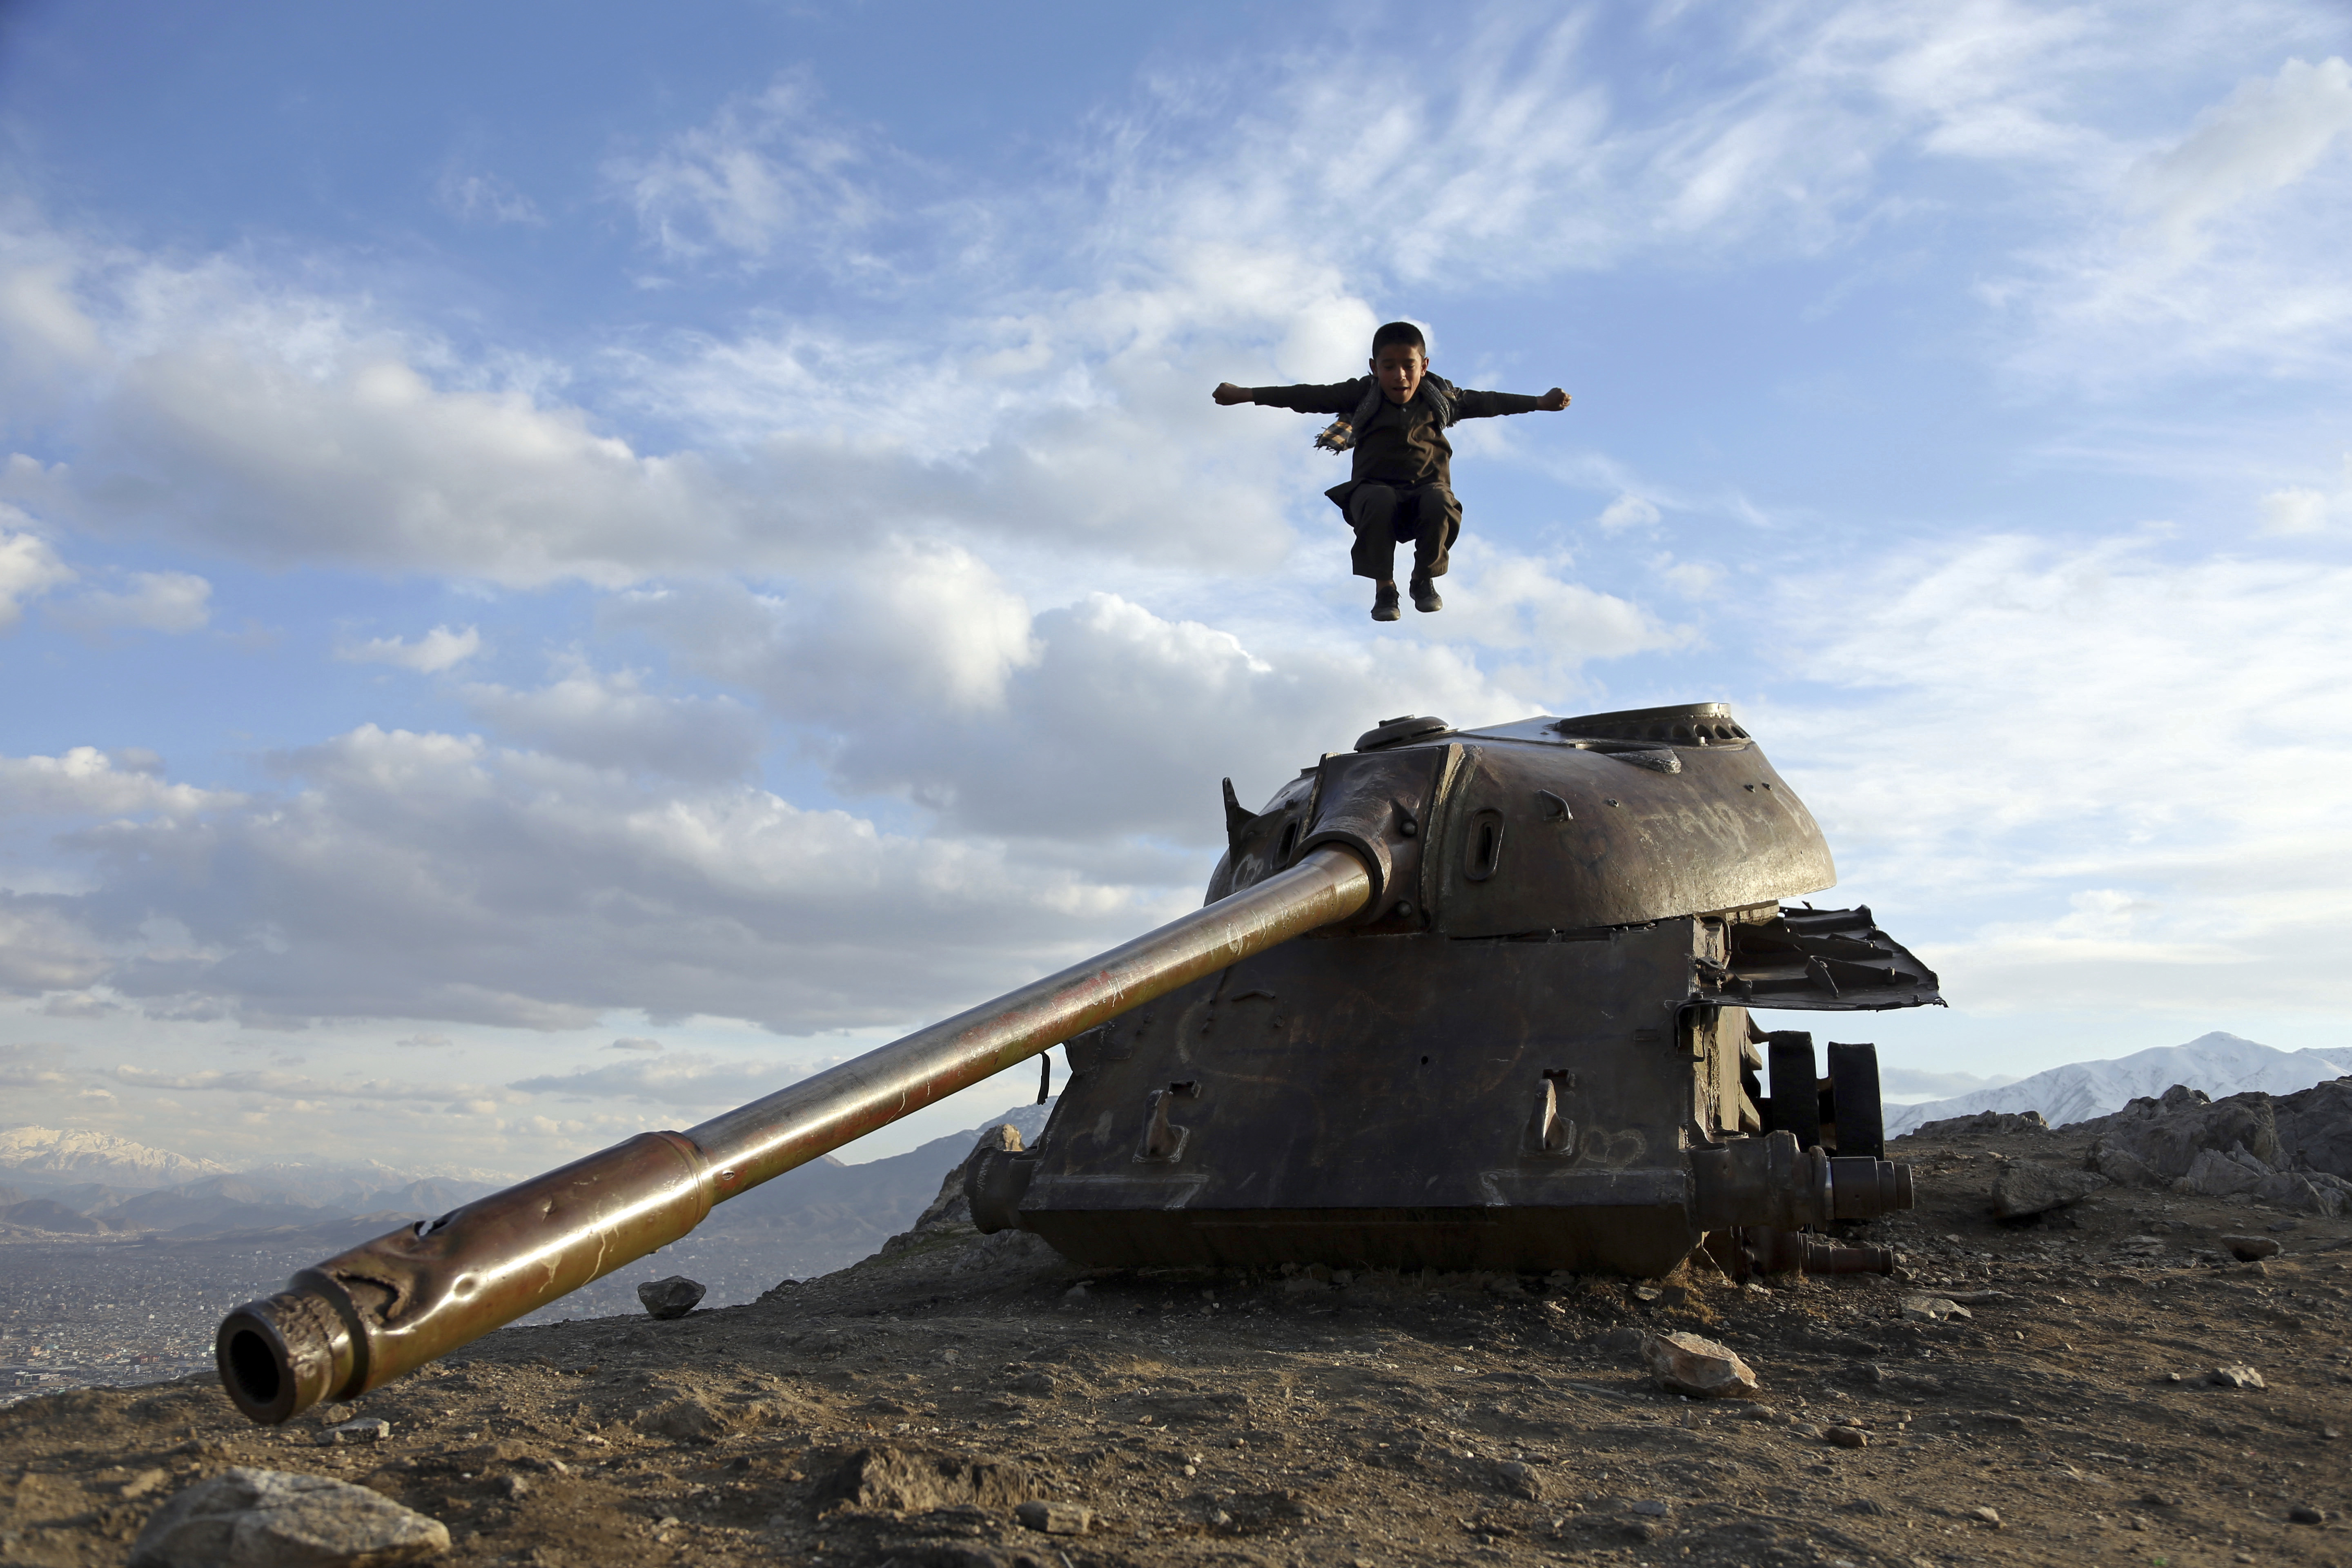 An Afghan boy jumps off the turret of a Soviet tank on a hilltop on the the outskirts of Kabul, Sunday, March, 4, 2018. (AP Photo/Rahmat Gul)